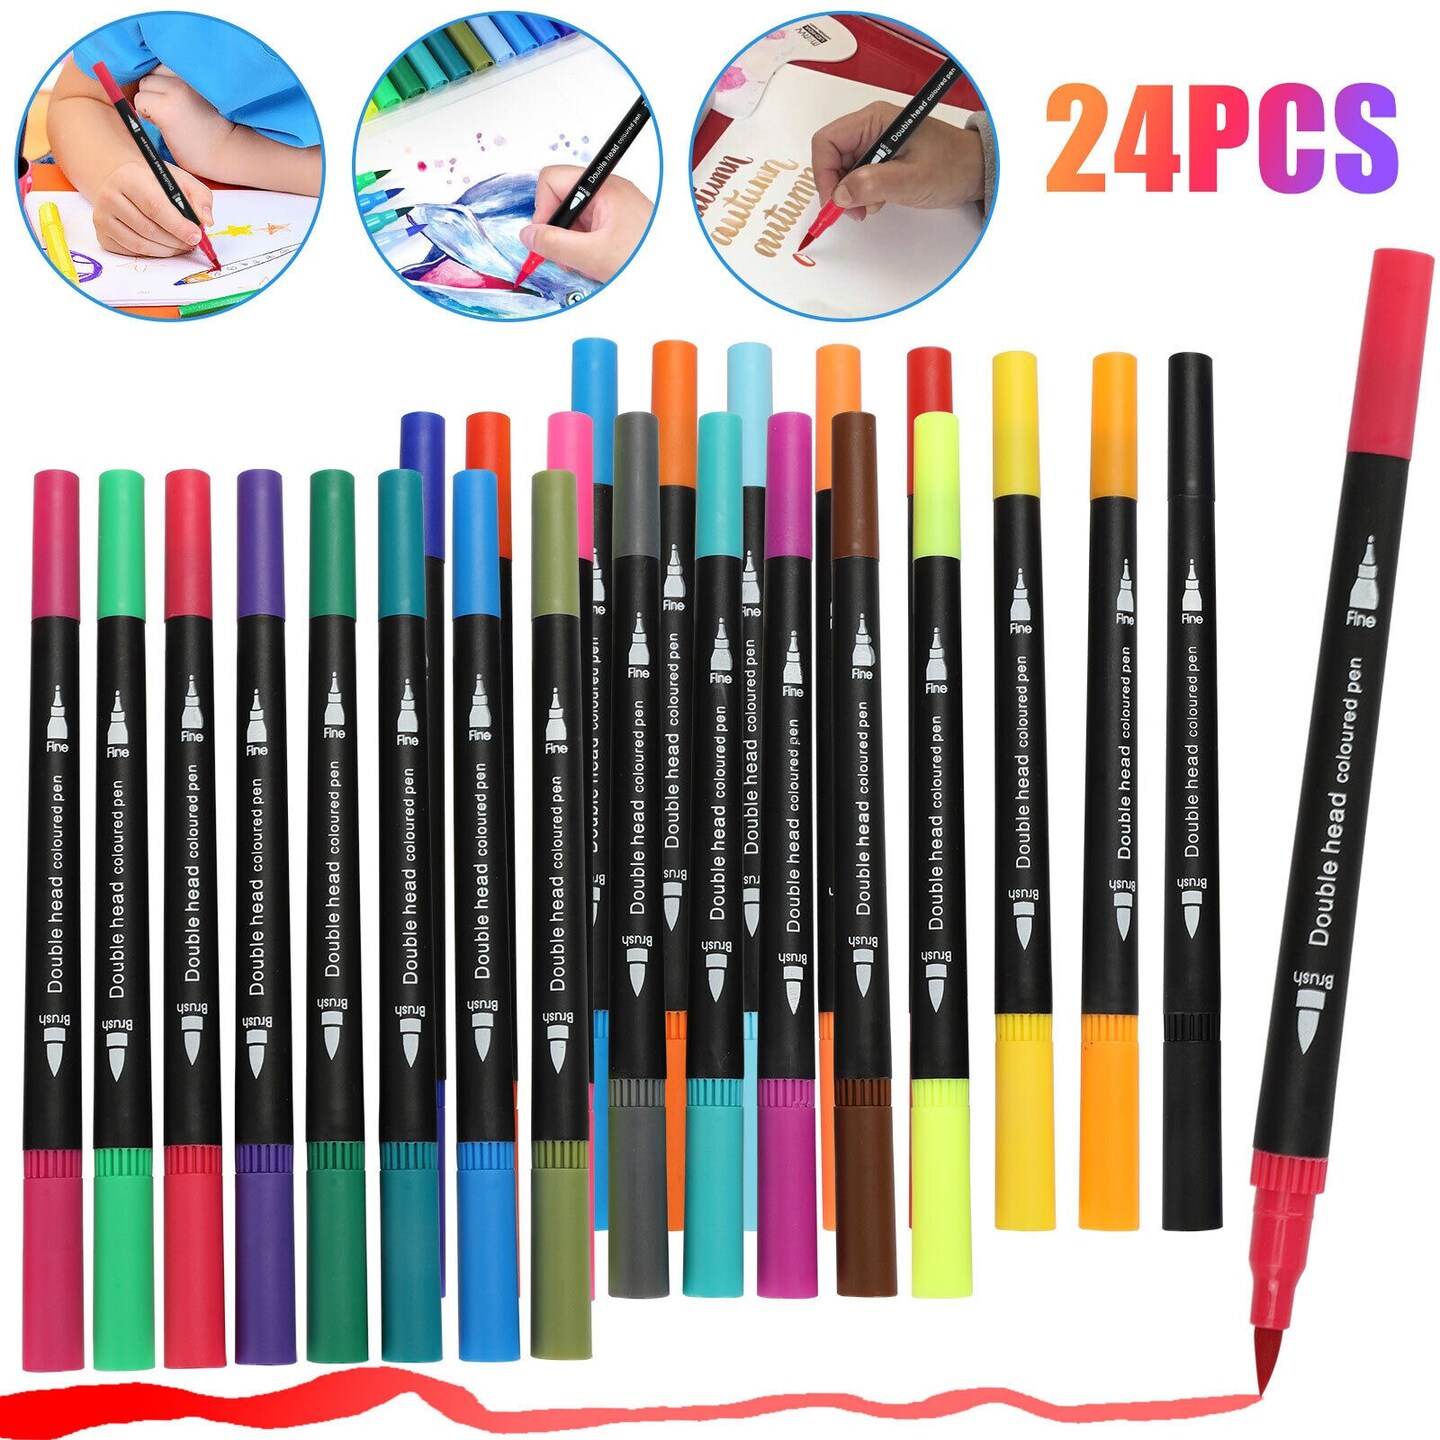 Mosaiz Dual Tip Fabric Markers 20 Chisel and Fine Tip Markers Fabric Paint Pens for Fabric Decorating with Gold and Silver Colors Including Numbers